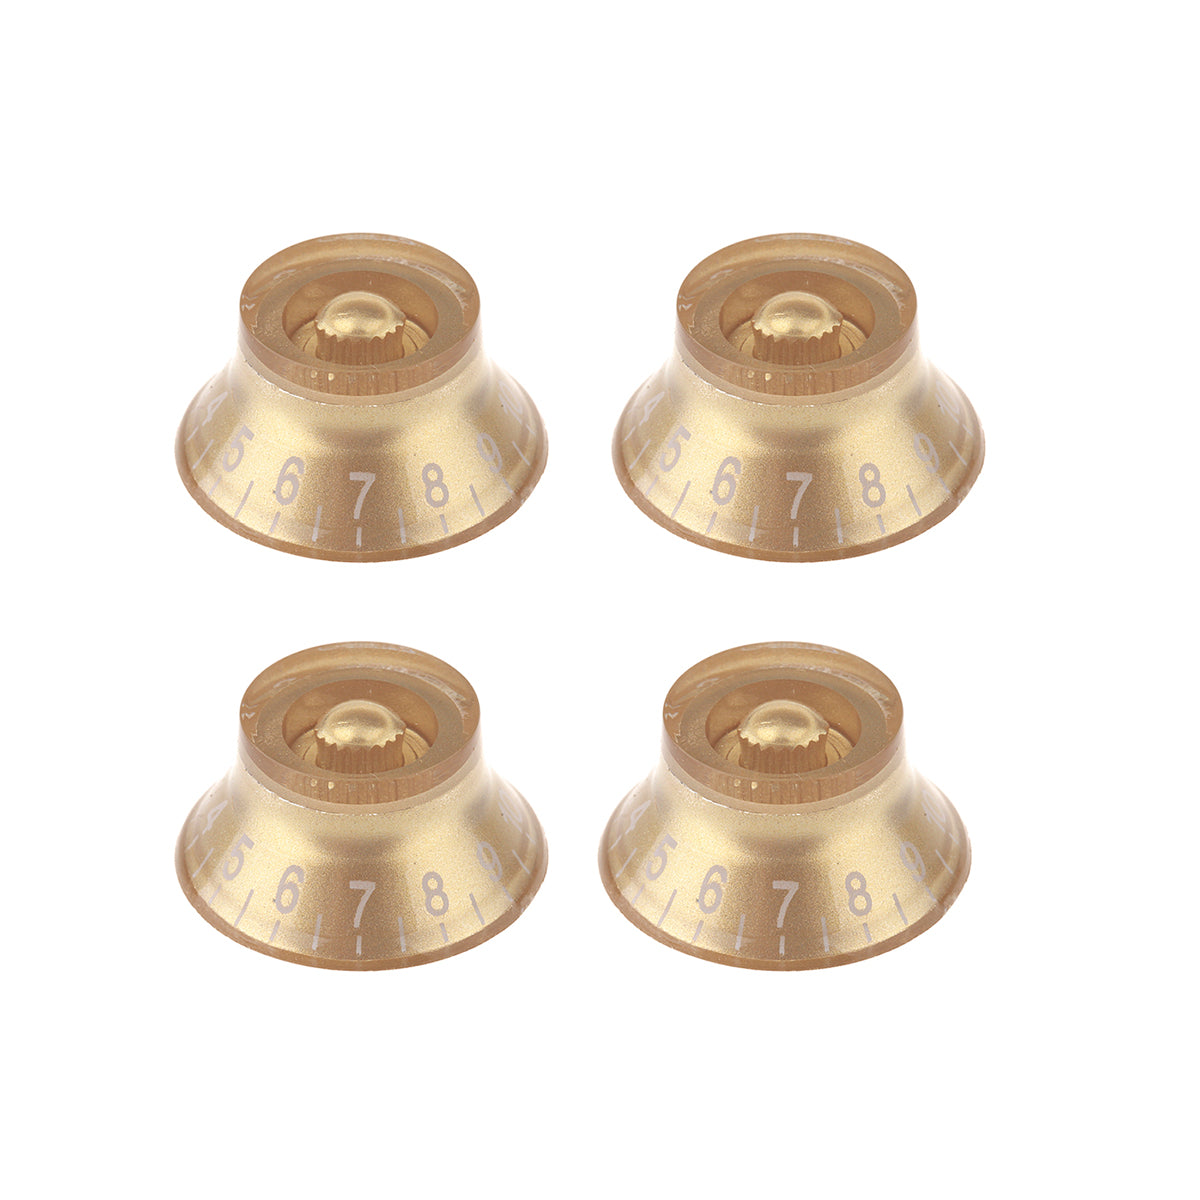 Musiclily Metric 6mm Top Hat LP Style Guitar Speed Control Knobs,Gold (4 Pieces)